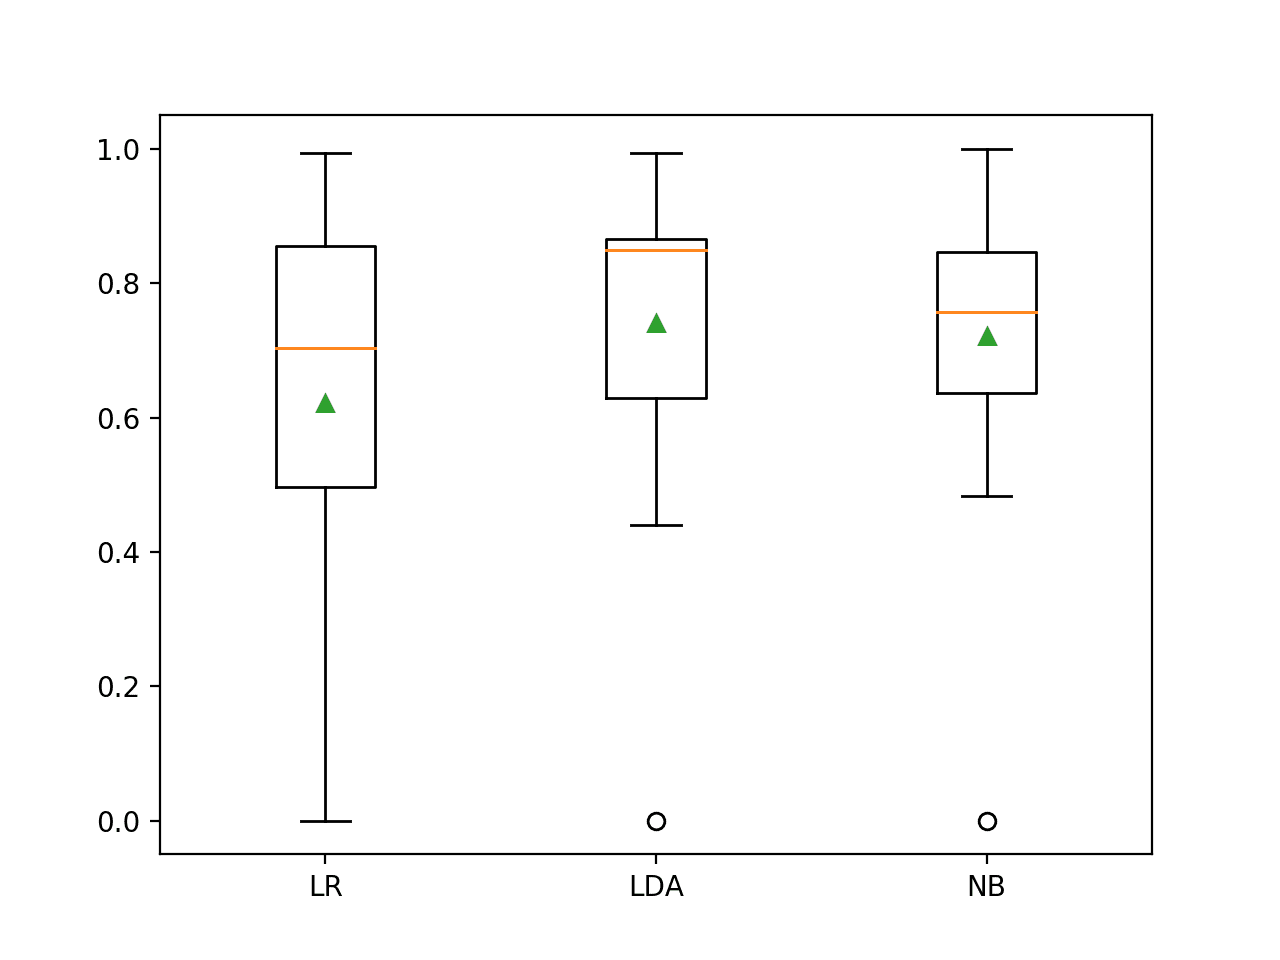 Box and Whisker Plot of Probabilistic Models on the Imbalanced Oil Spill Dataset